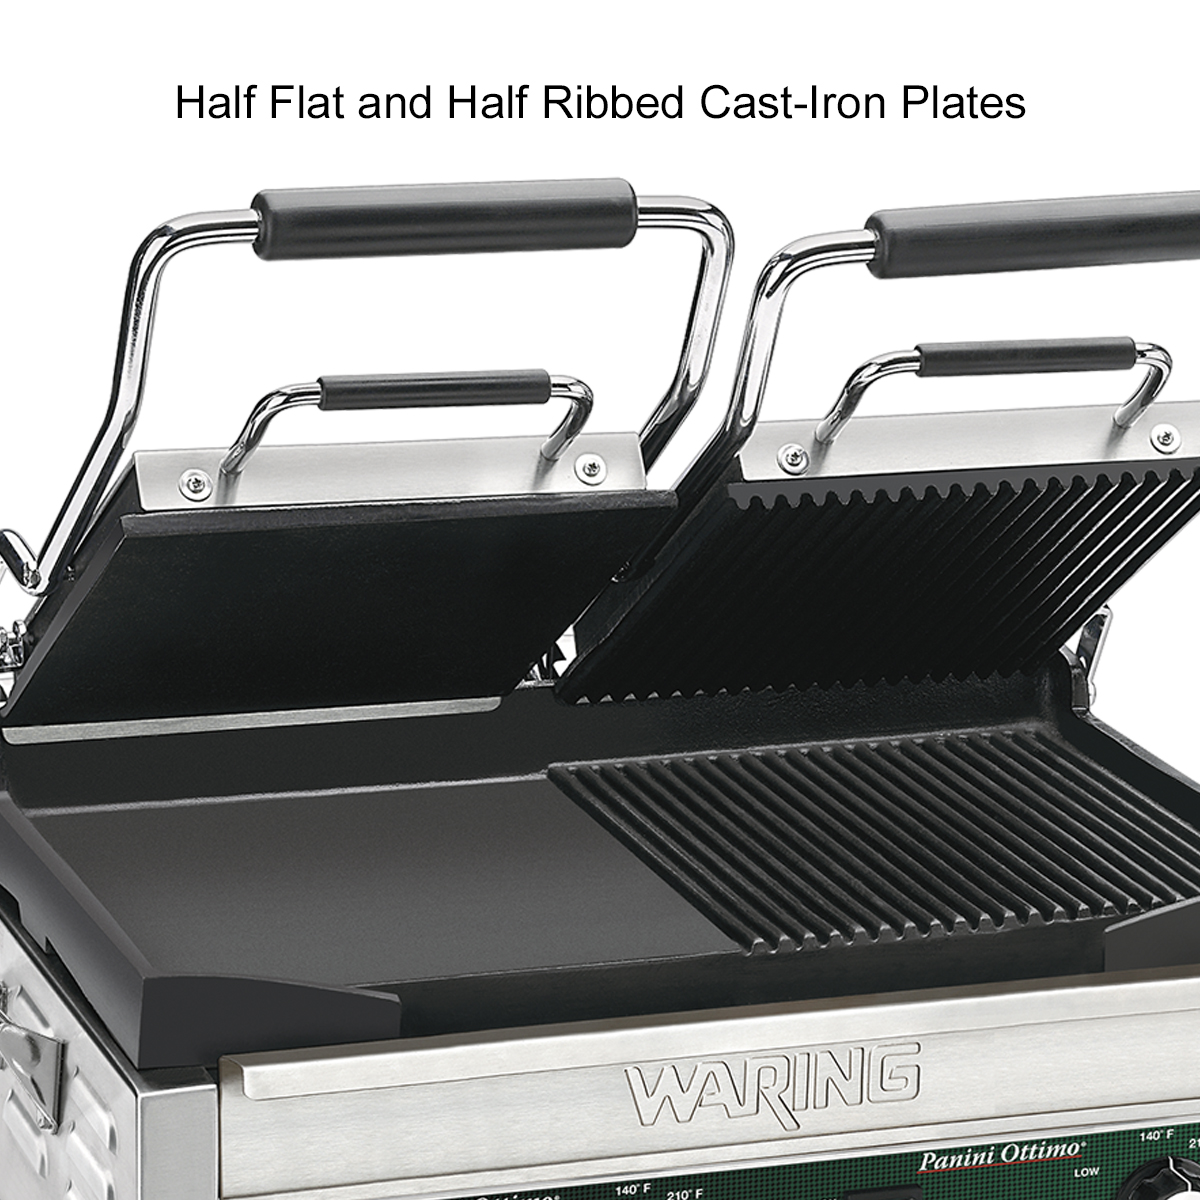 https://www.waringcommercialproducts.com/files/products/wdg300-waring-panini-grill-inset2.jpg